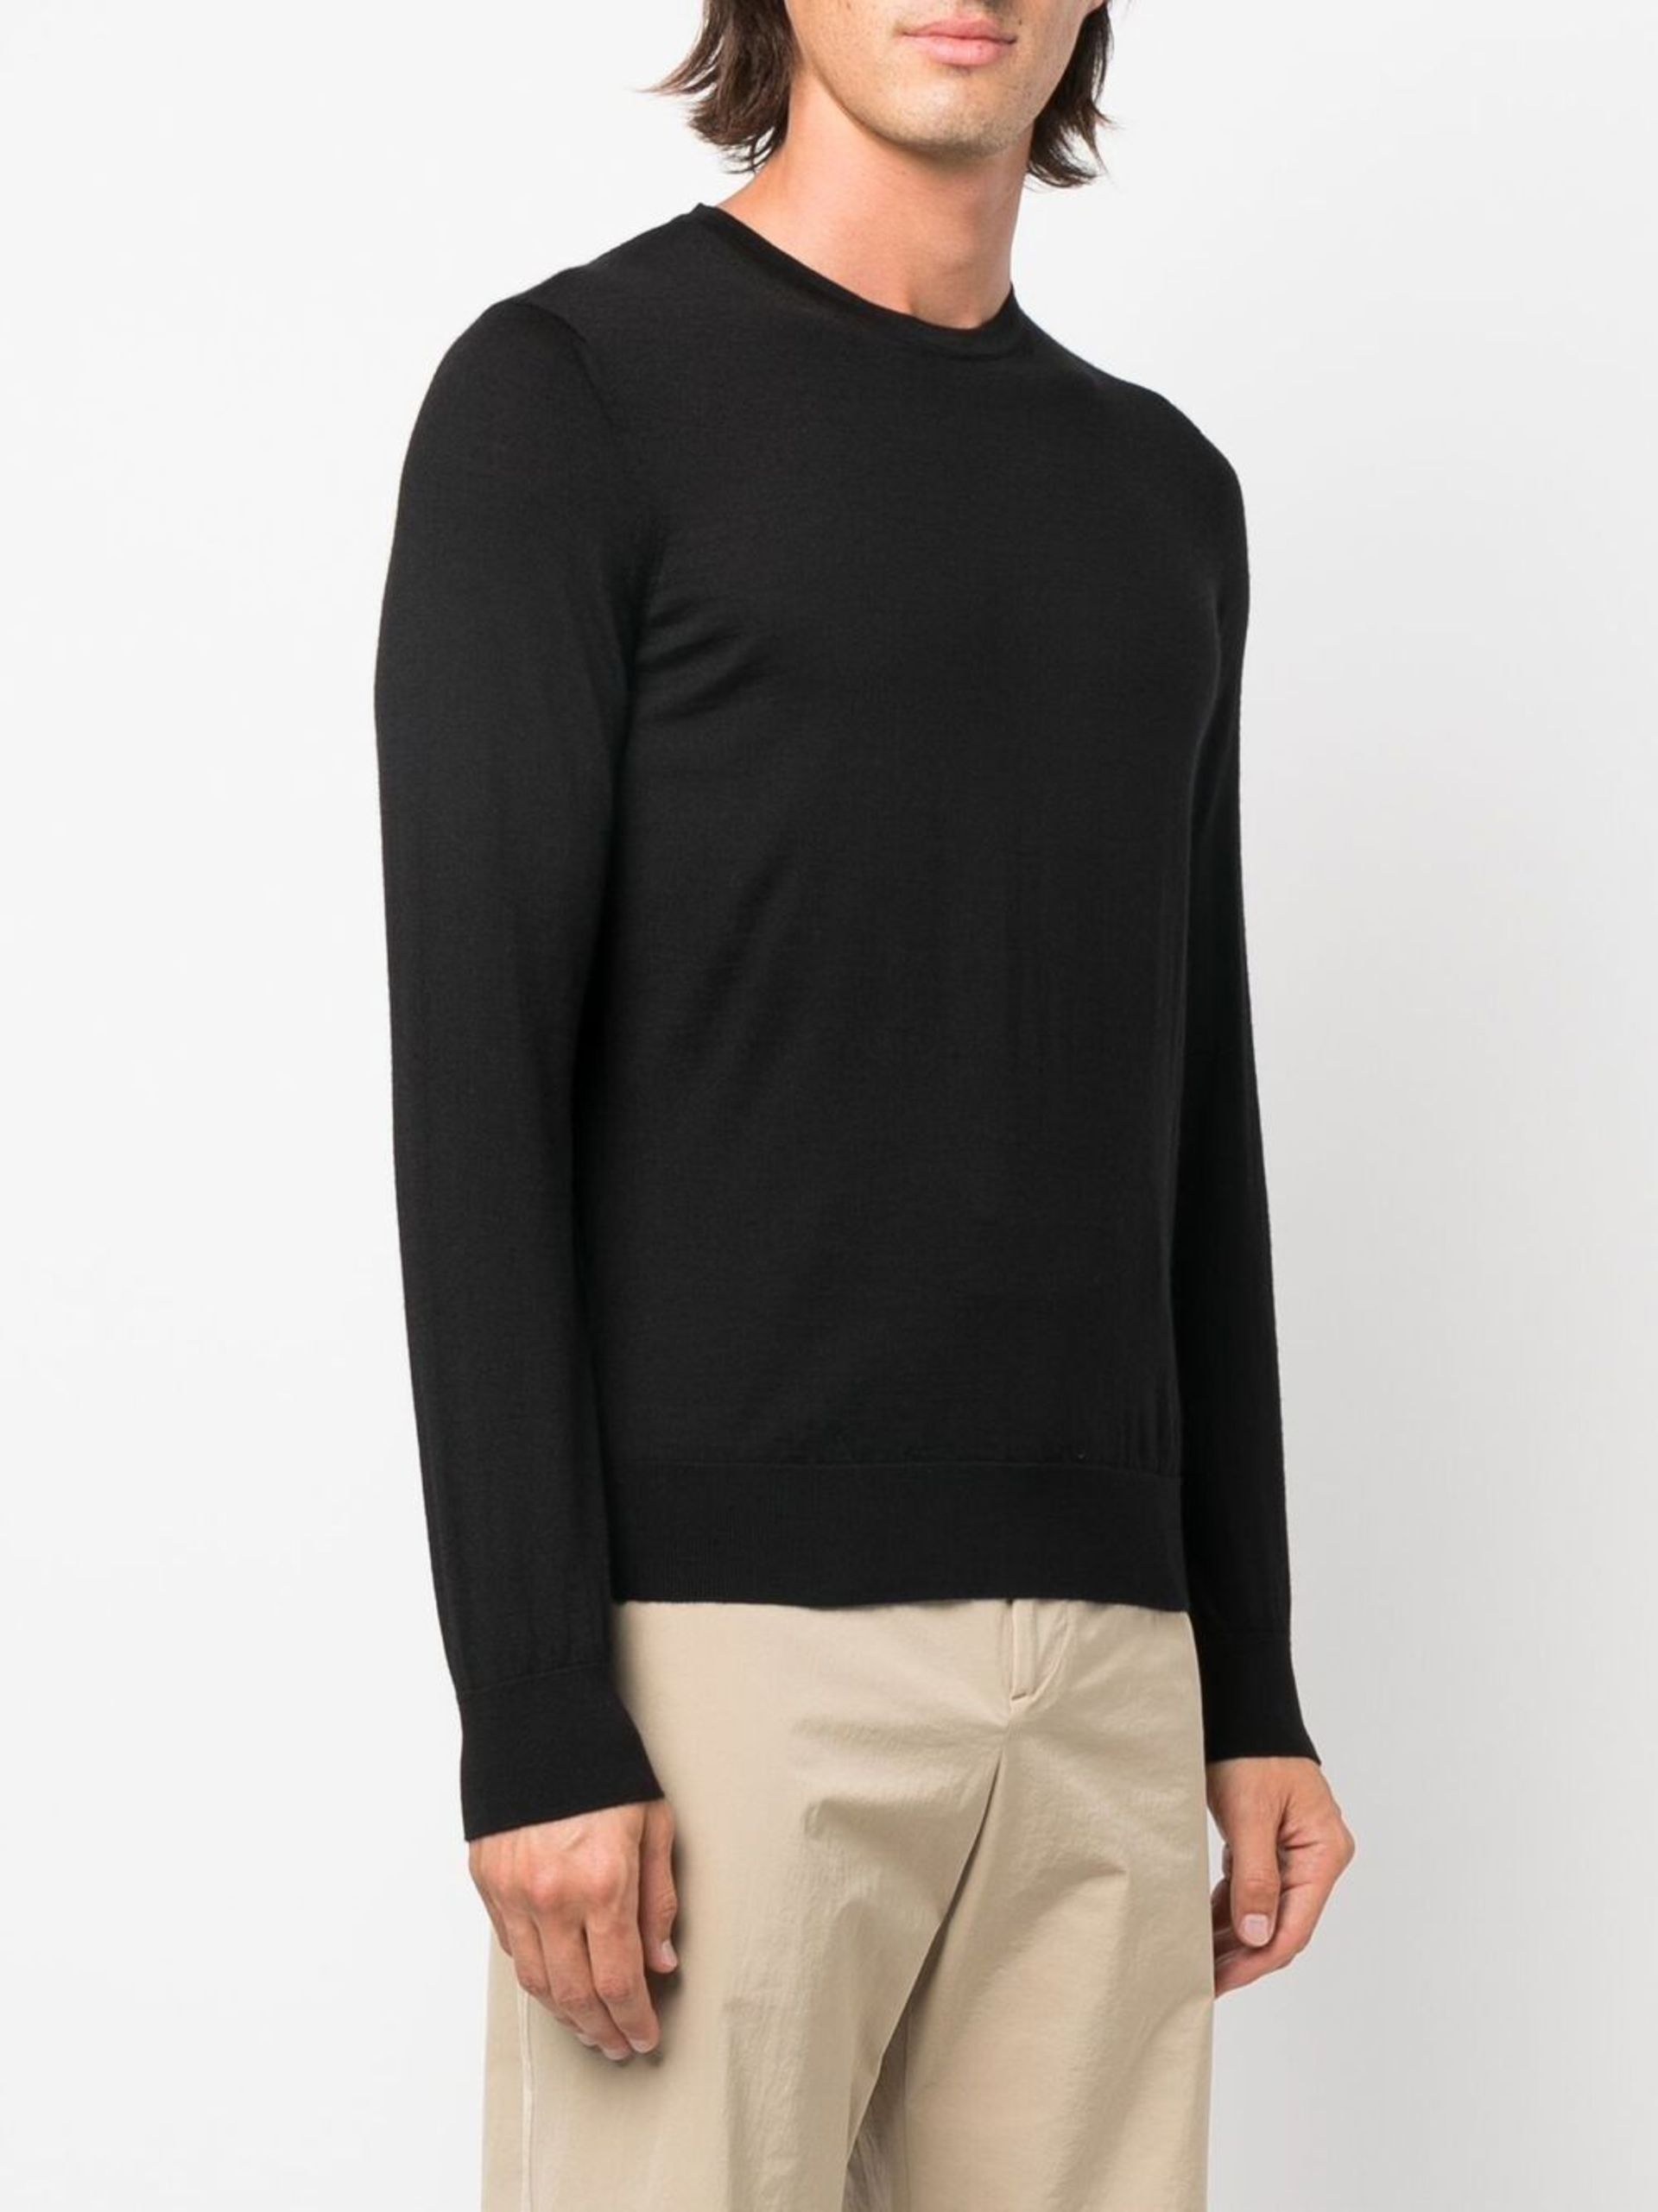 Black Knitted Sweater - 3